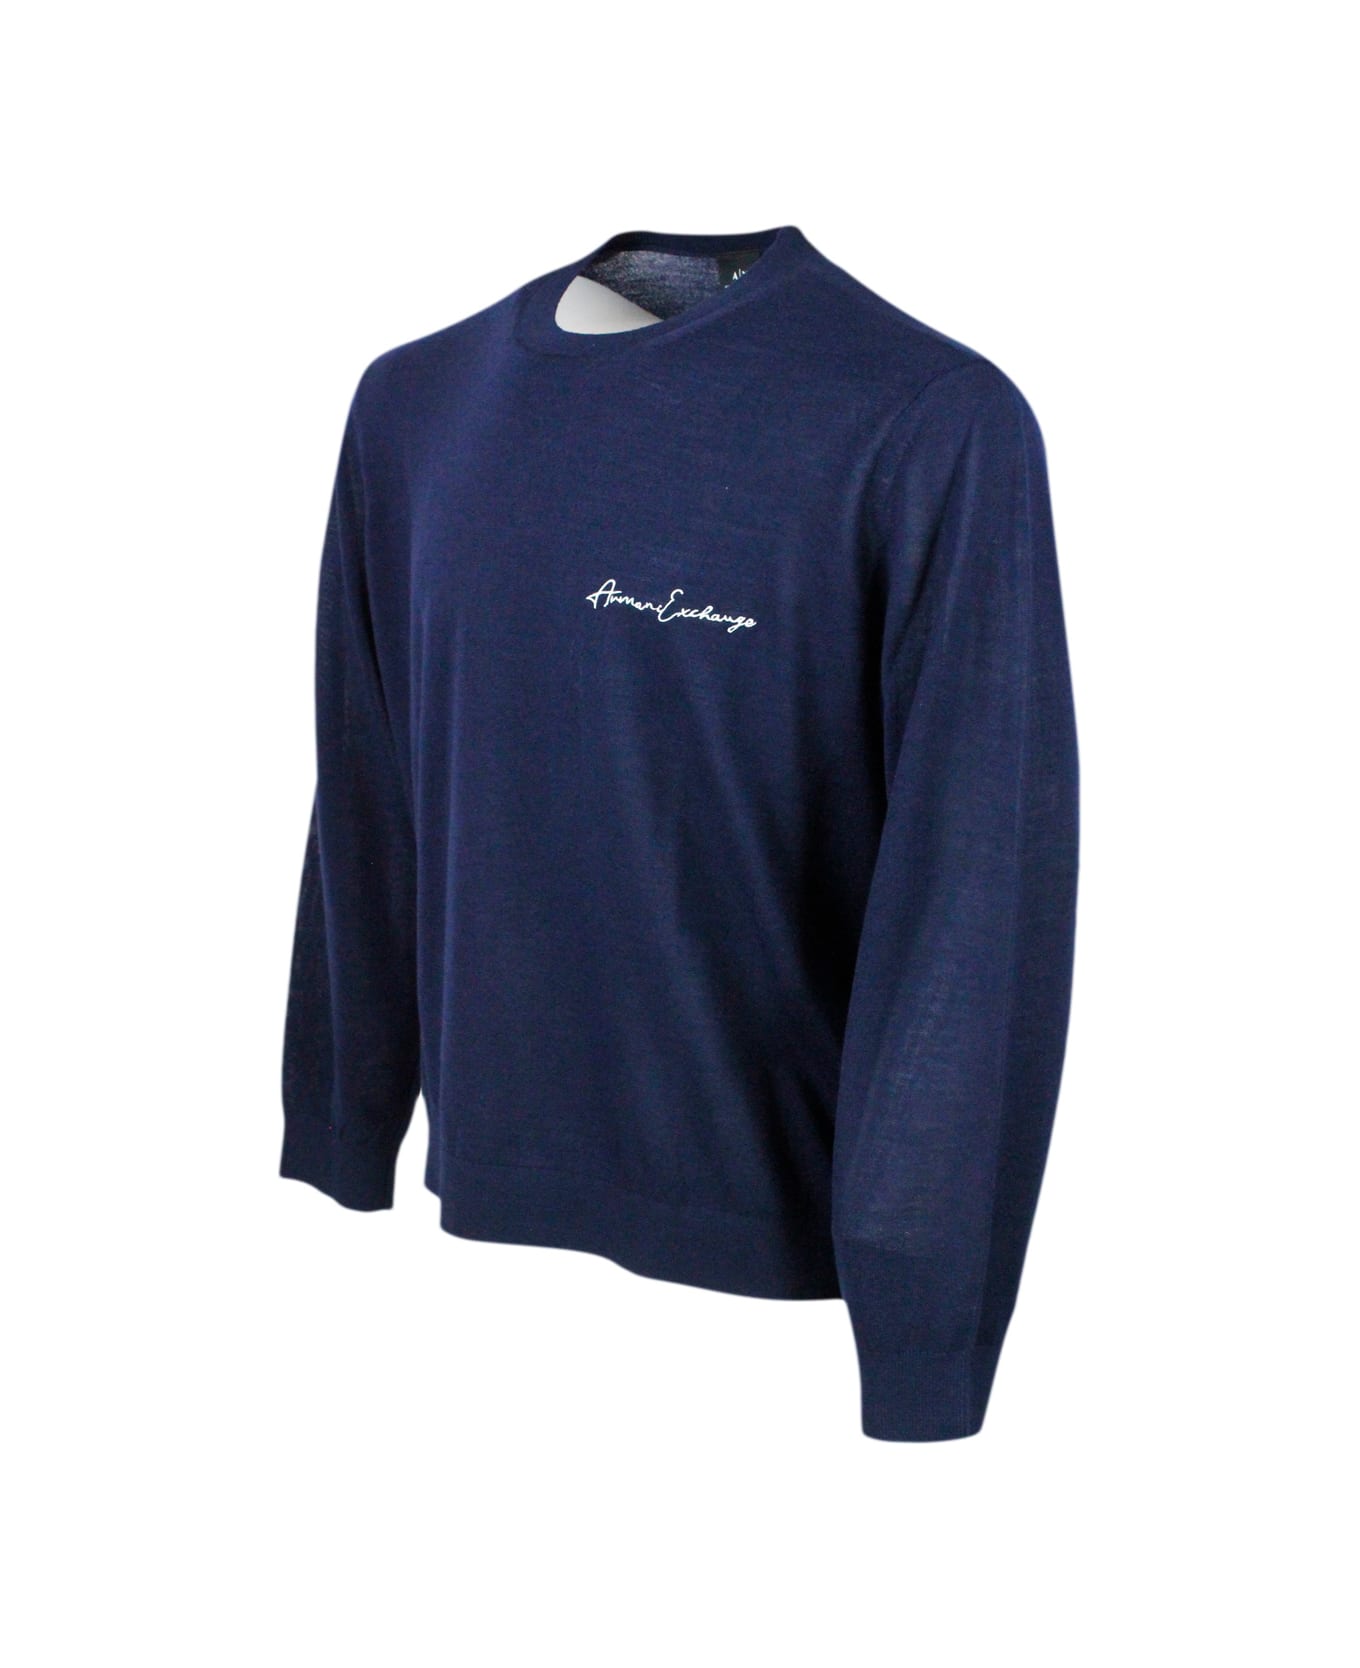 Armani Collezioni Lightweight Long-sleeved Crew-neck Sweater Made Of Wool Blend With Logo Writing On The Chest - Blu